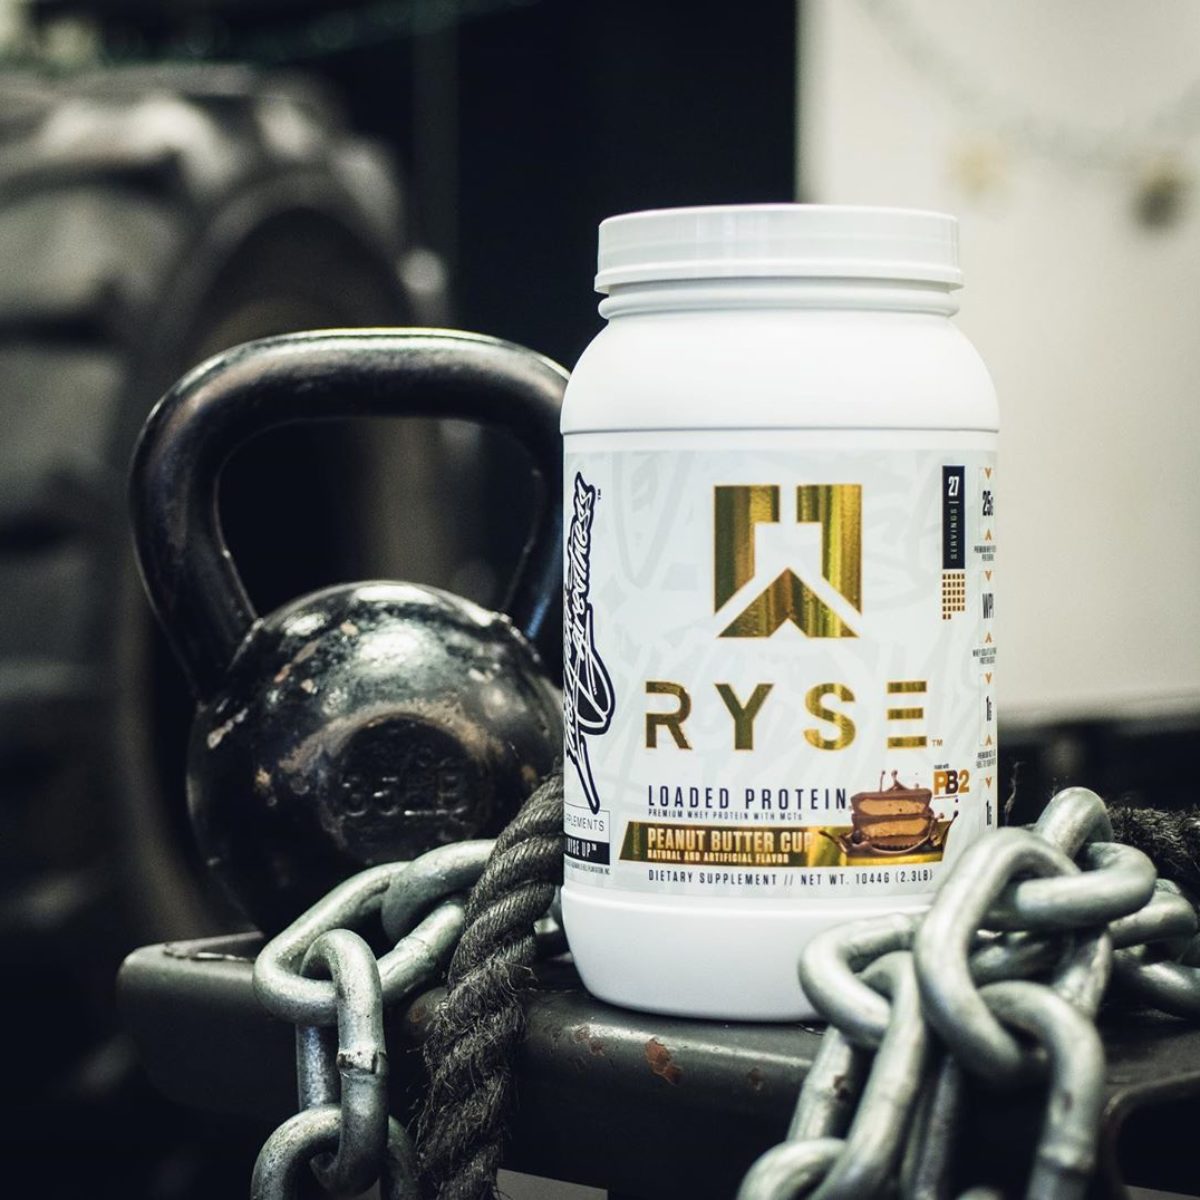 https://blog.priceplow.com/wp-content/uploads/ryse-loaded-protein-kettlebell-1200x1200-cropped.jpg